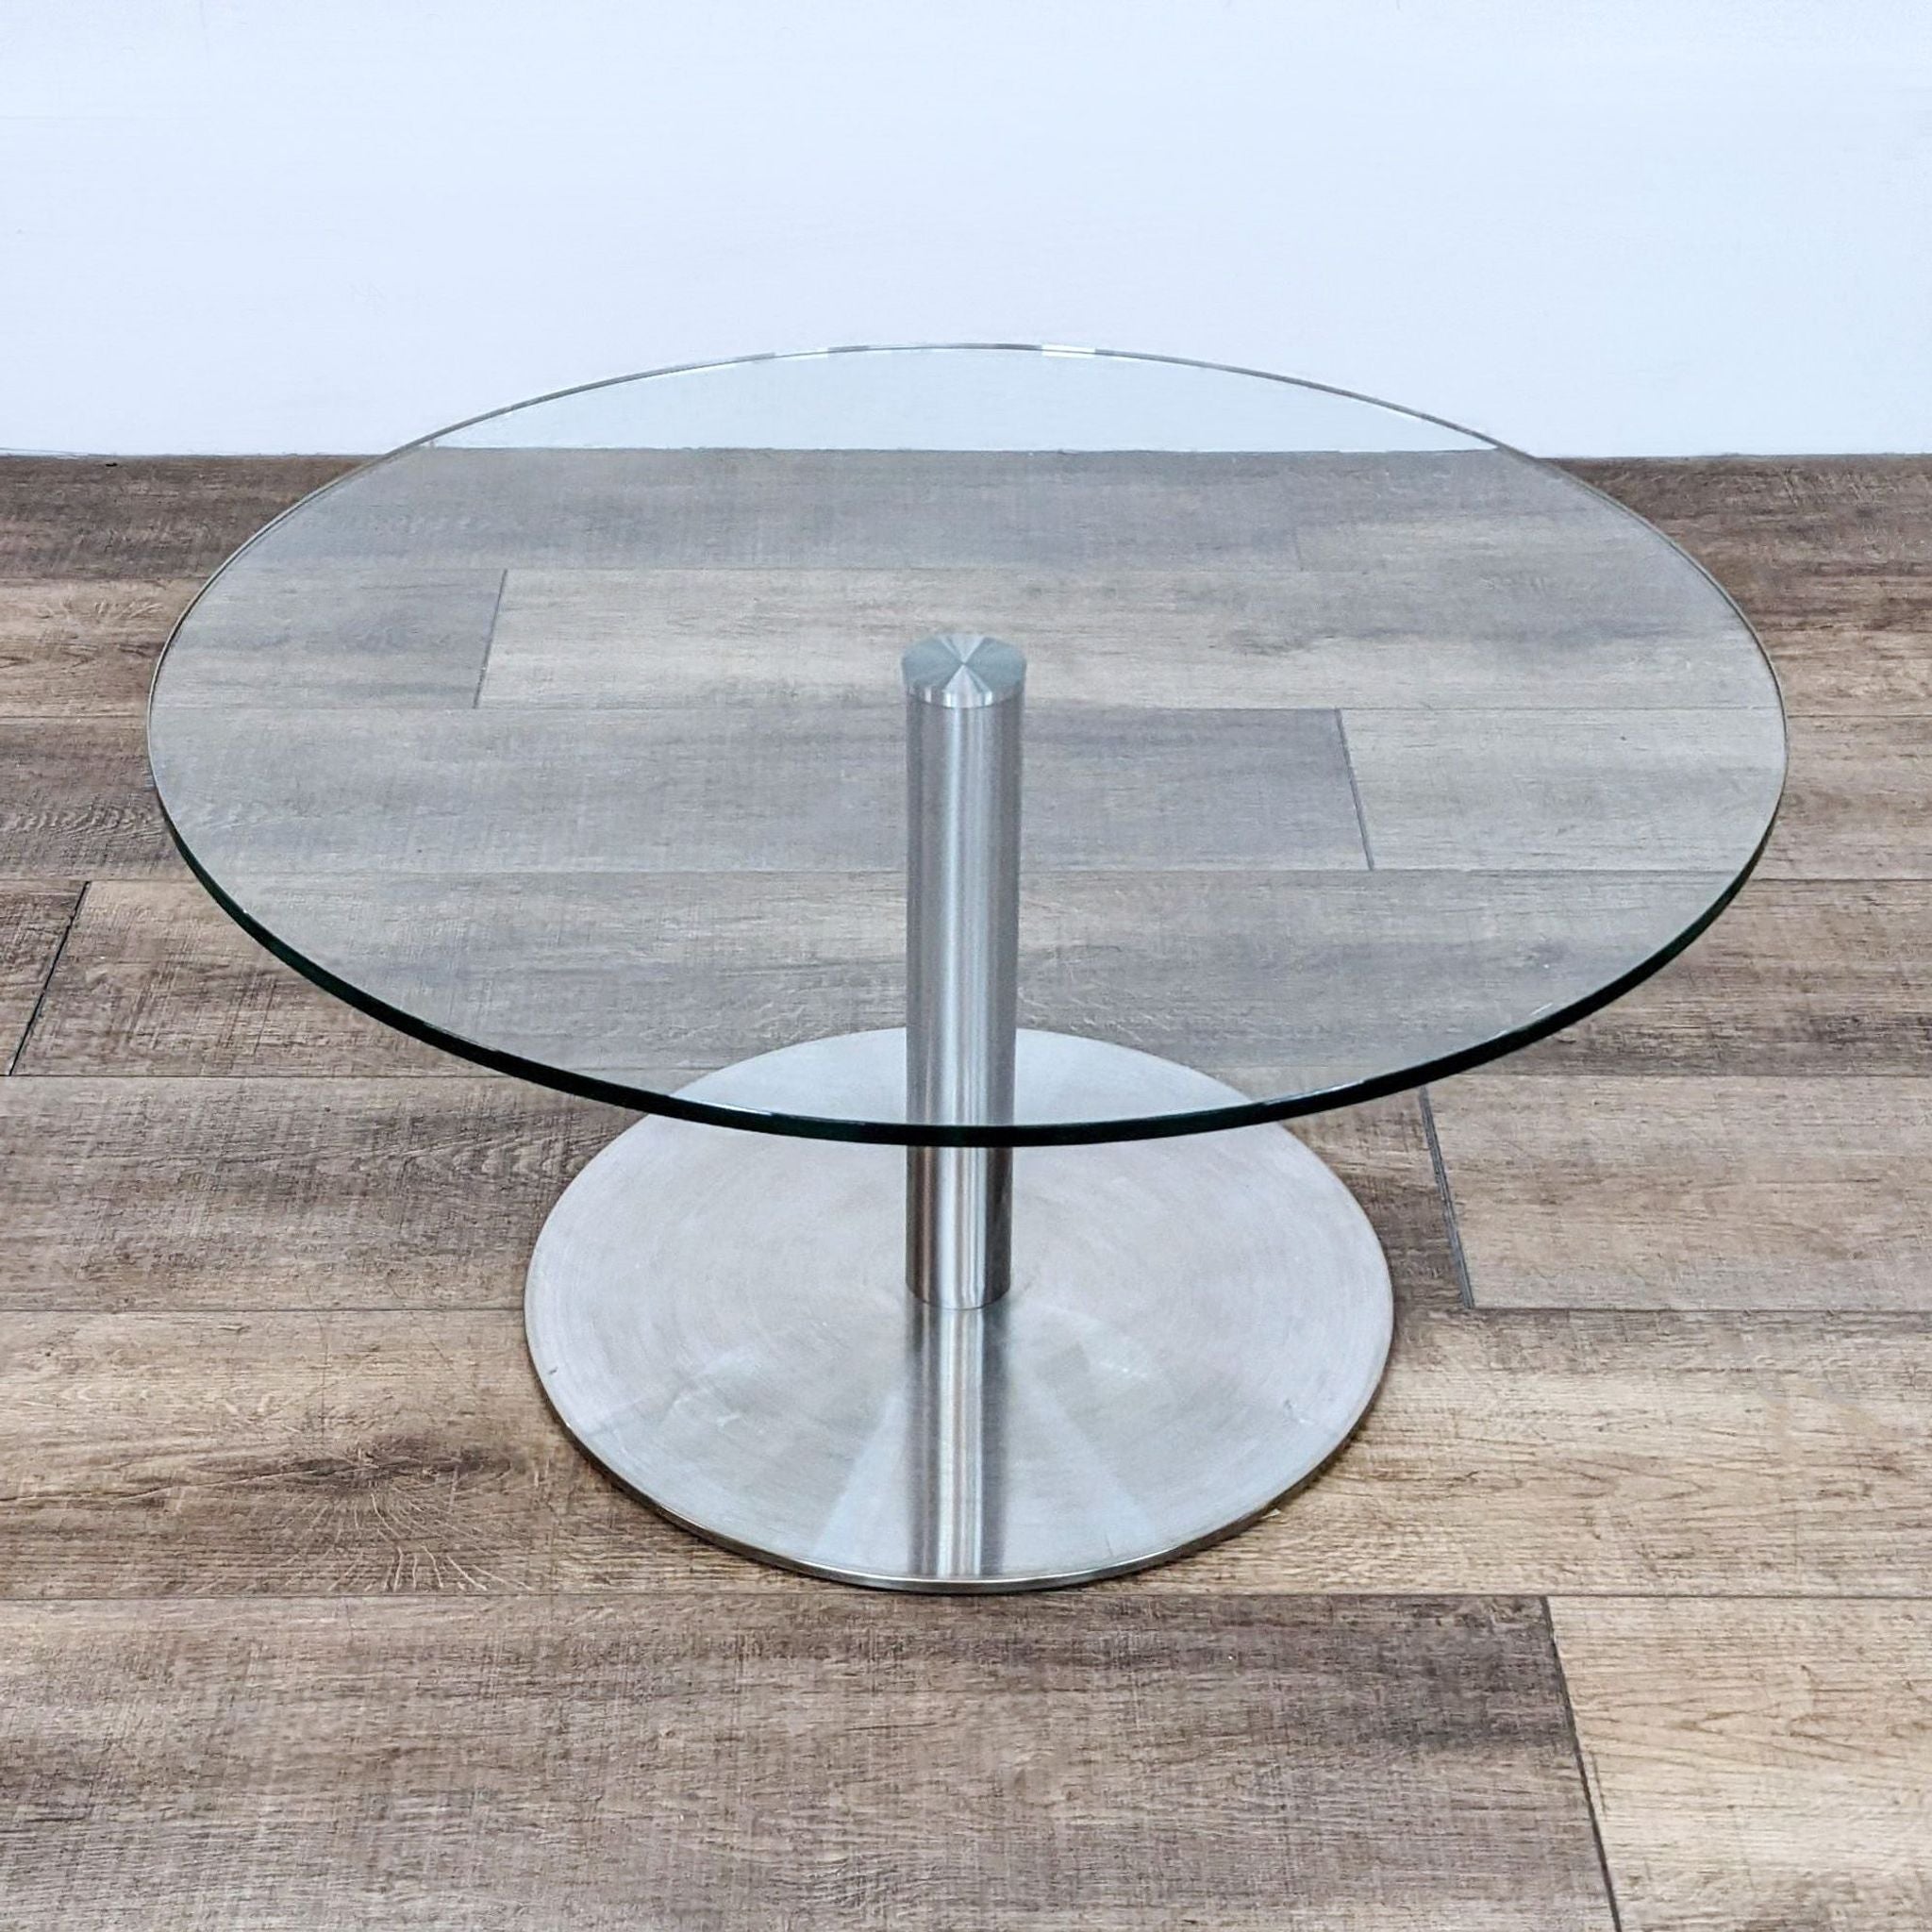 Round glass-top Reperch end table with a single metallic central leg on a wooden floor.